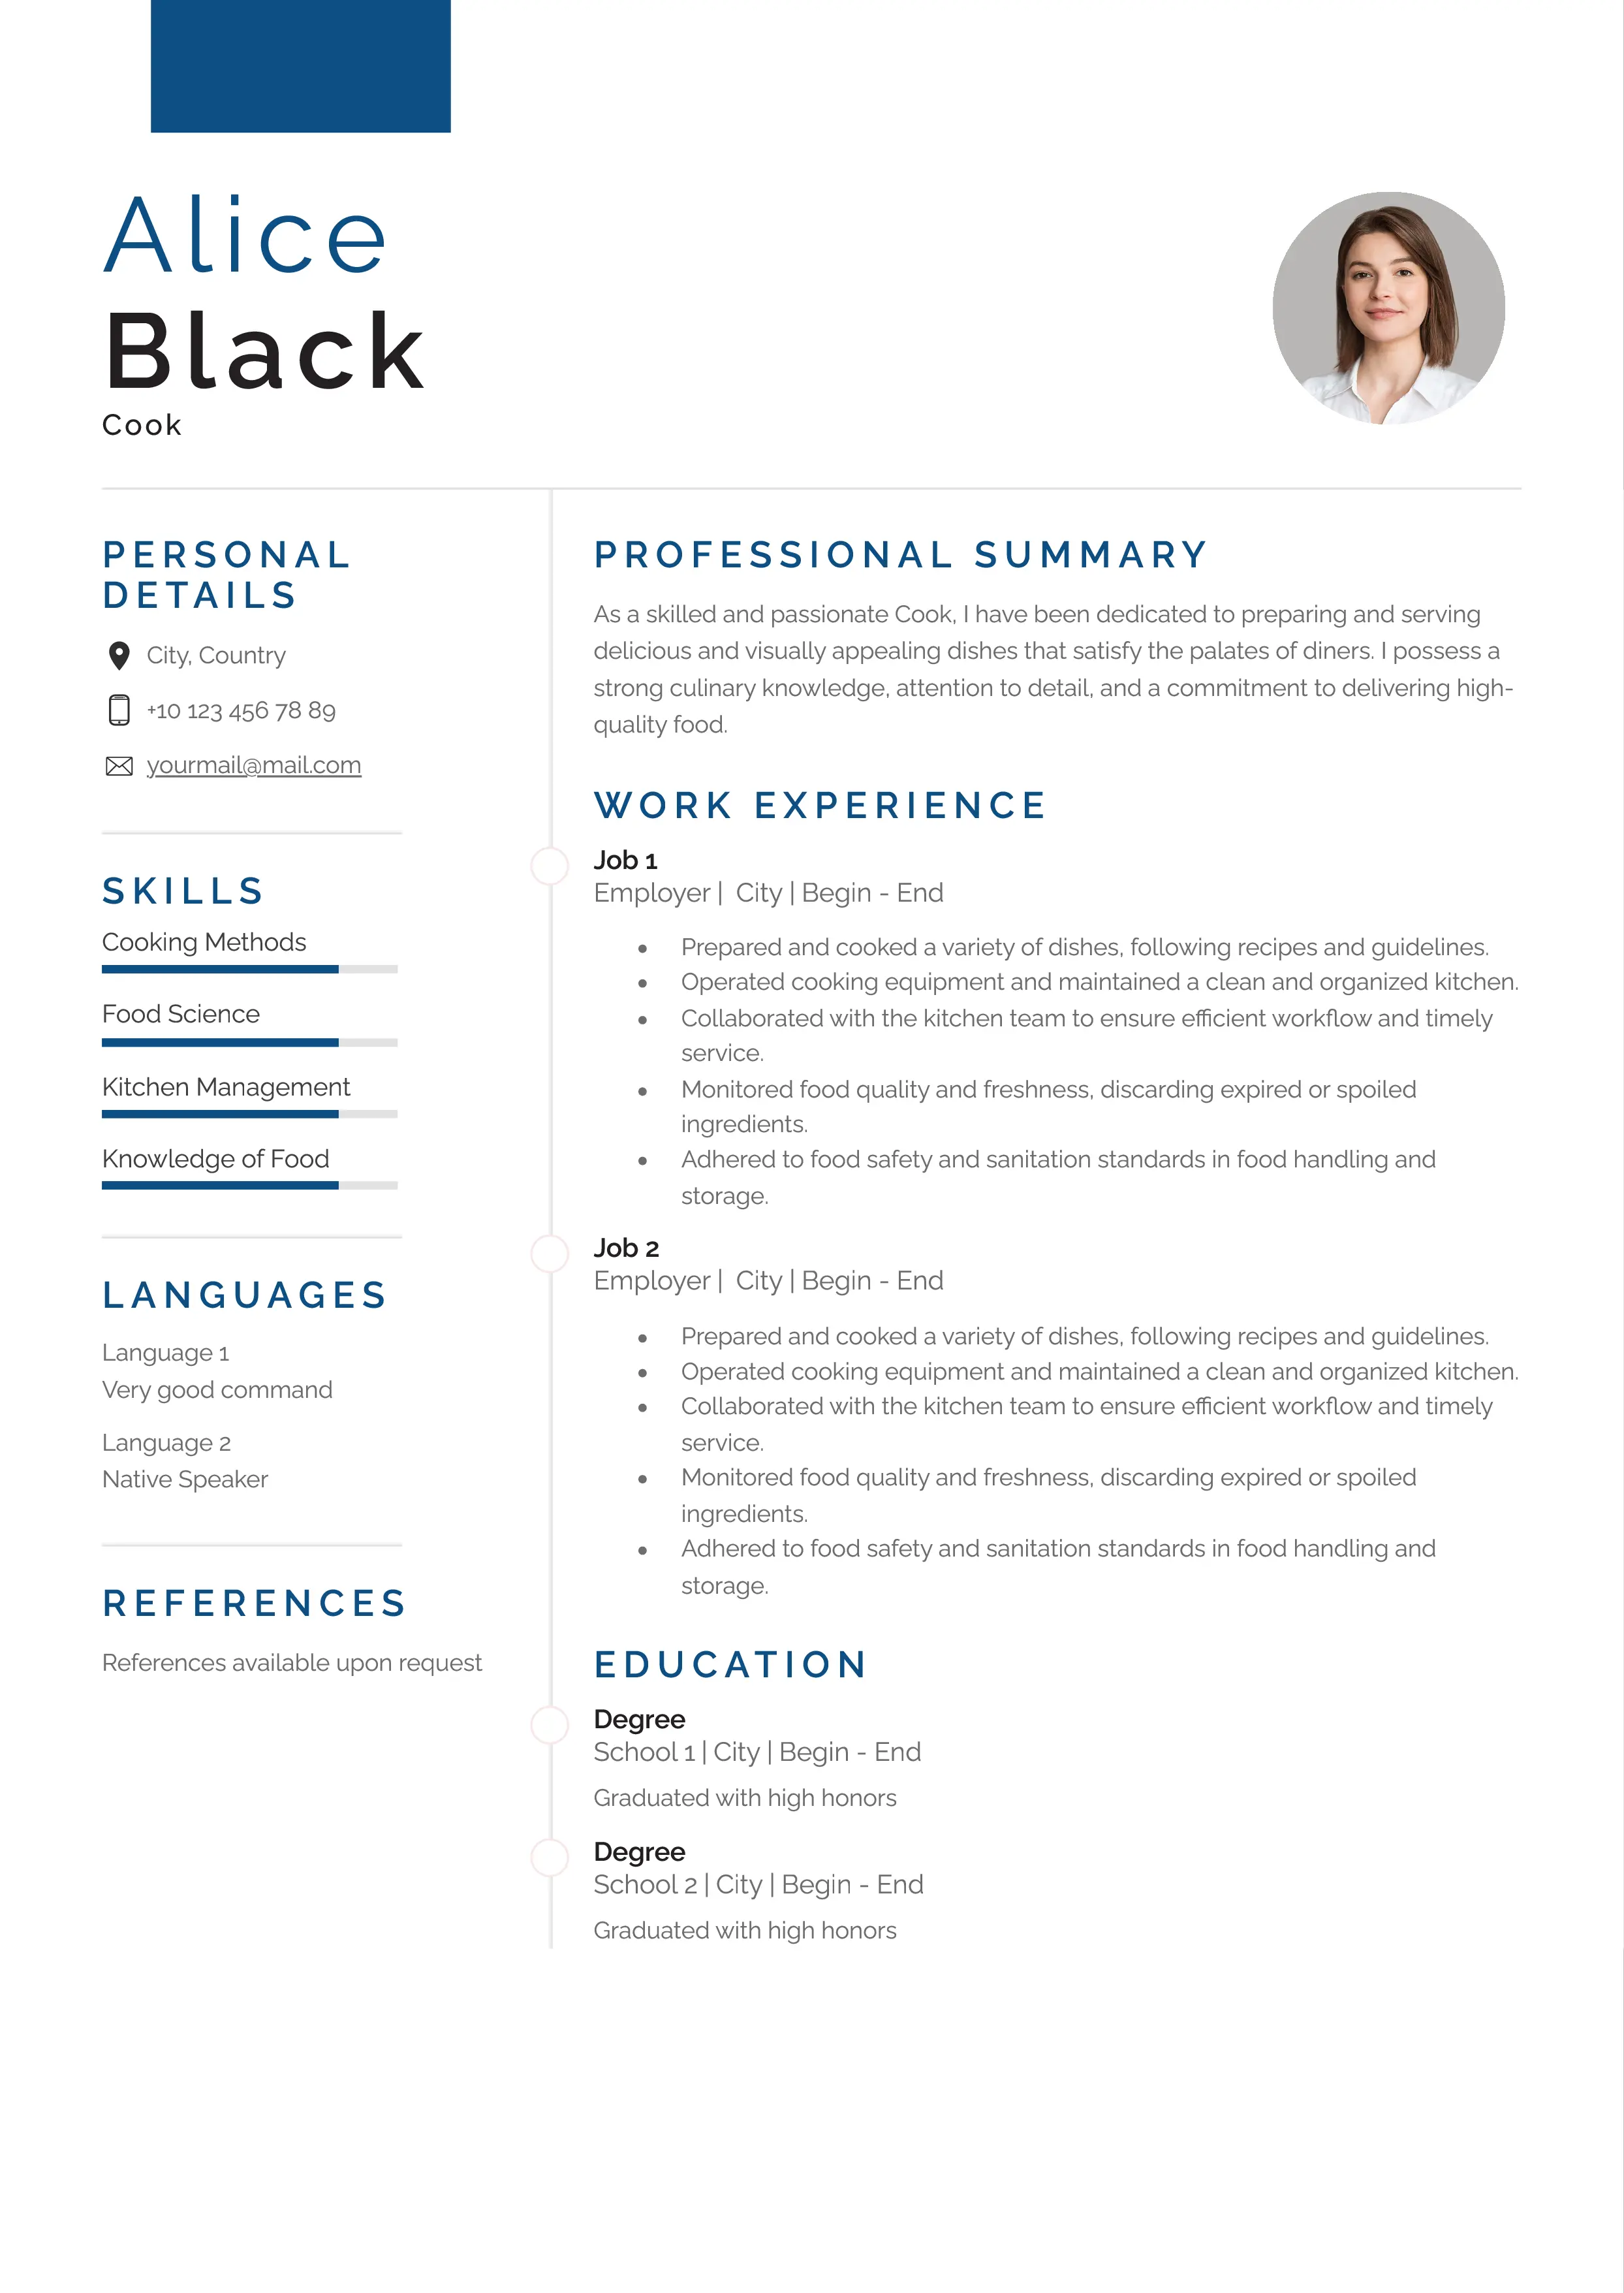 Cook resume example CV